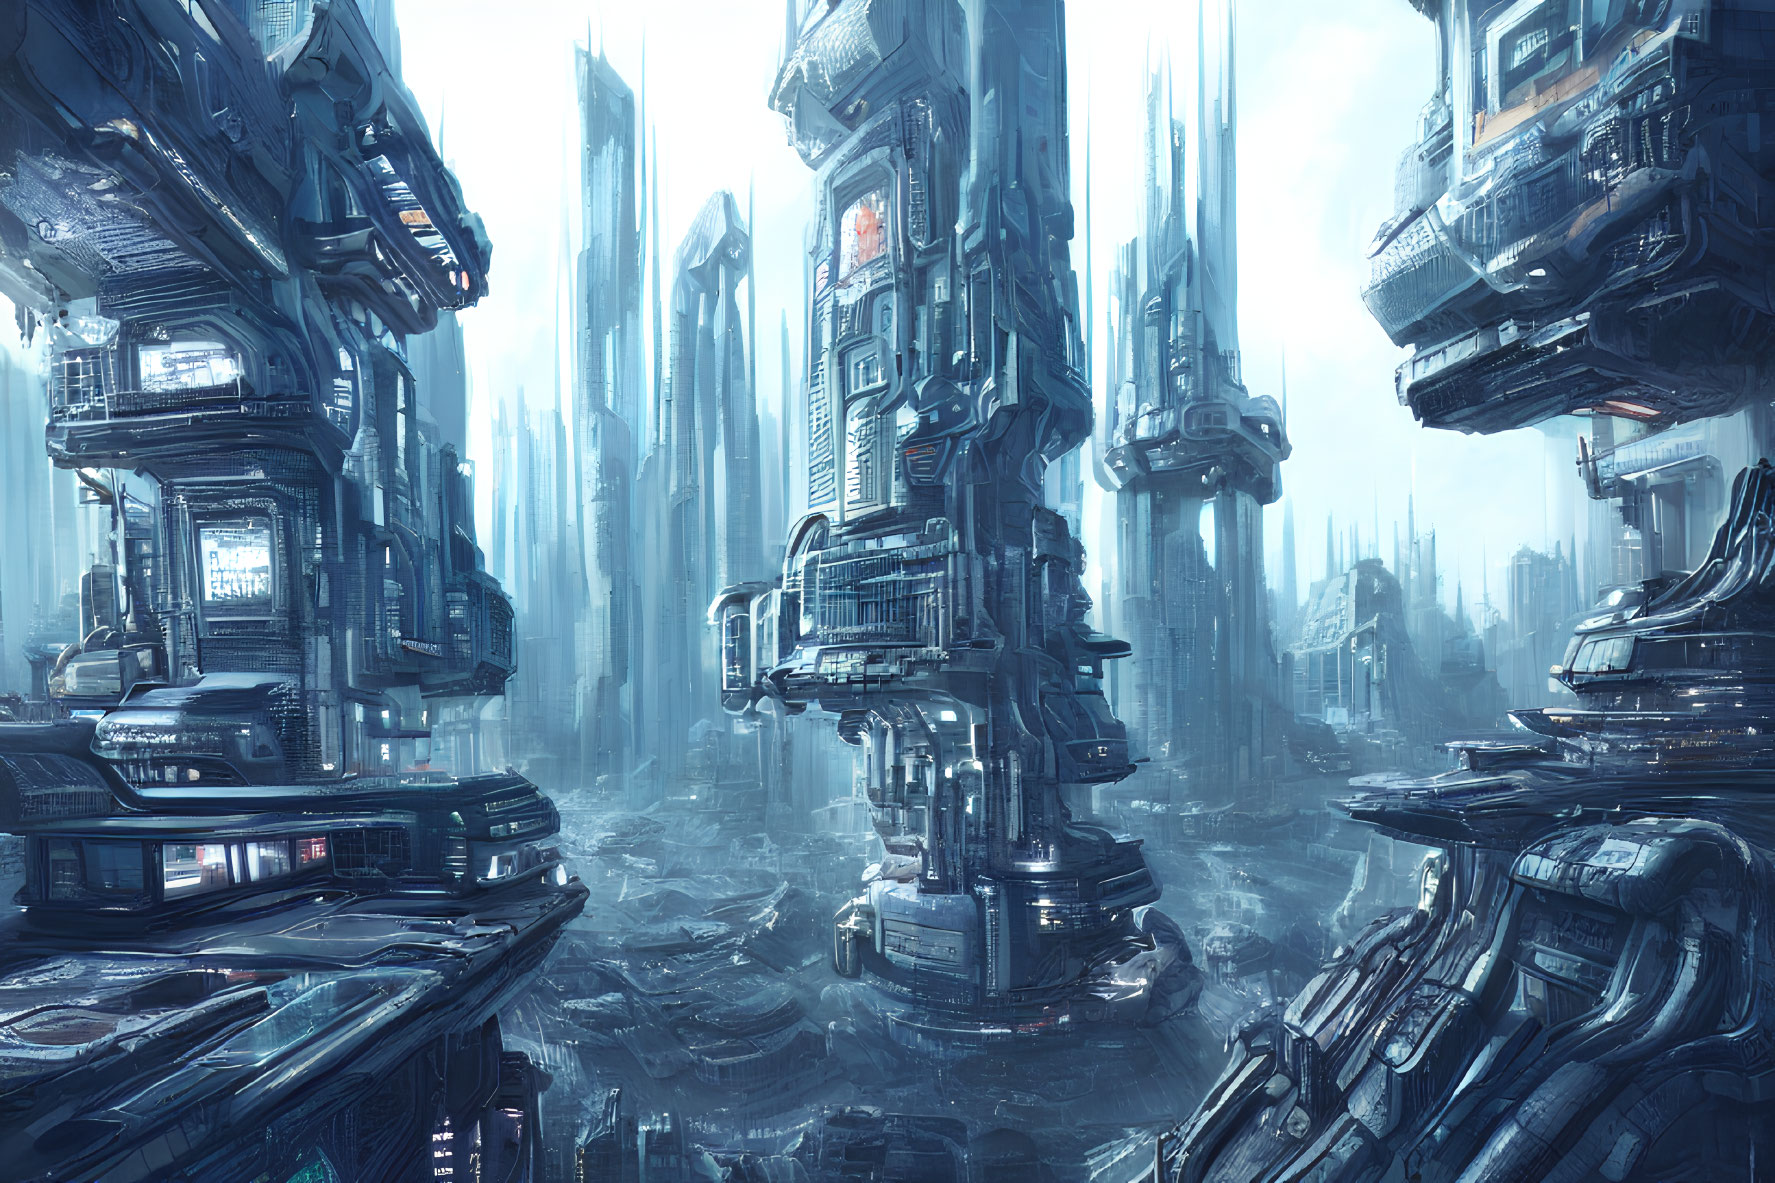 Futuristic cityscape with towering skyscrapers and advanced structures